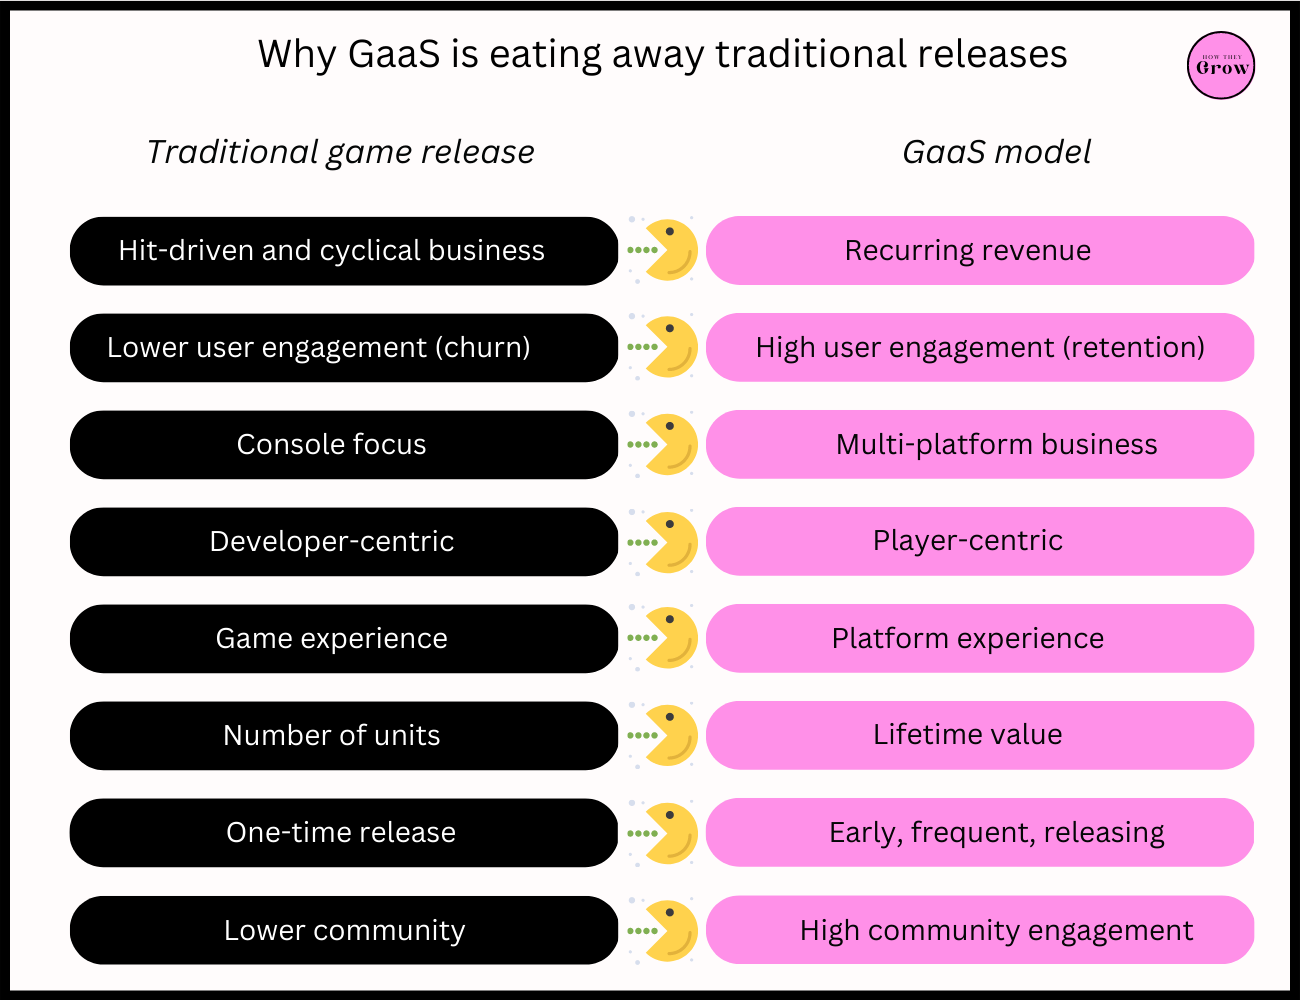 Games as a Service (GaaS): What It Is and How It Works